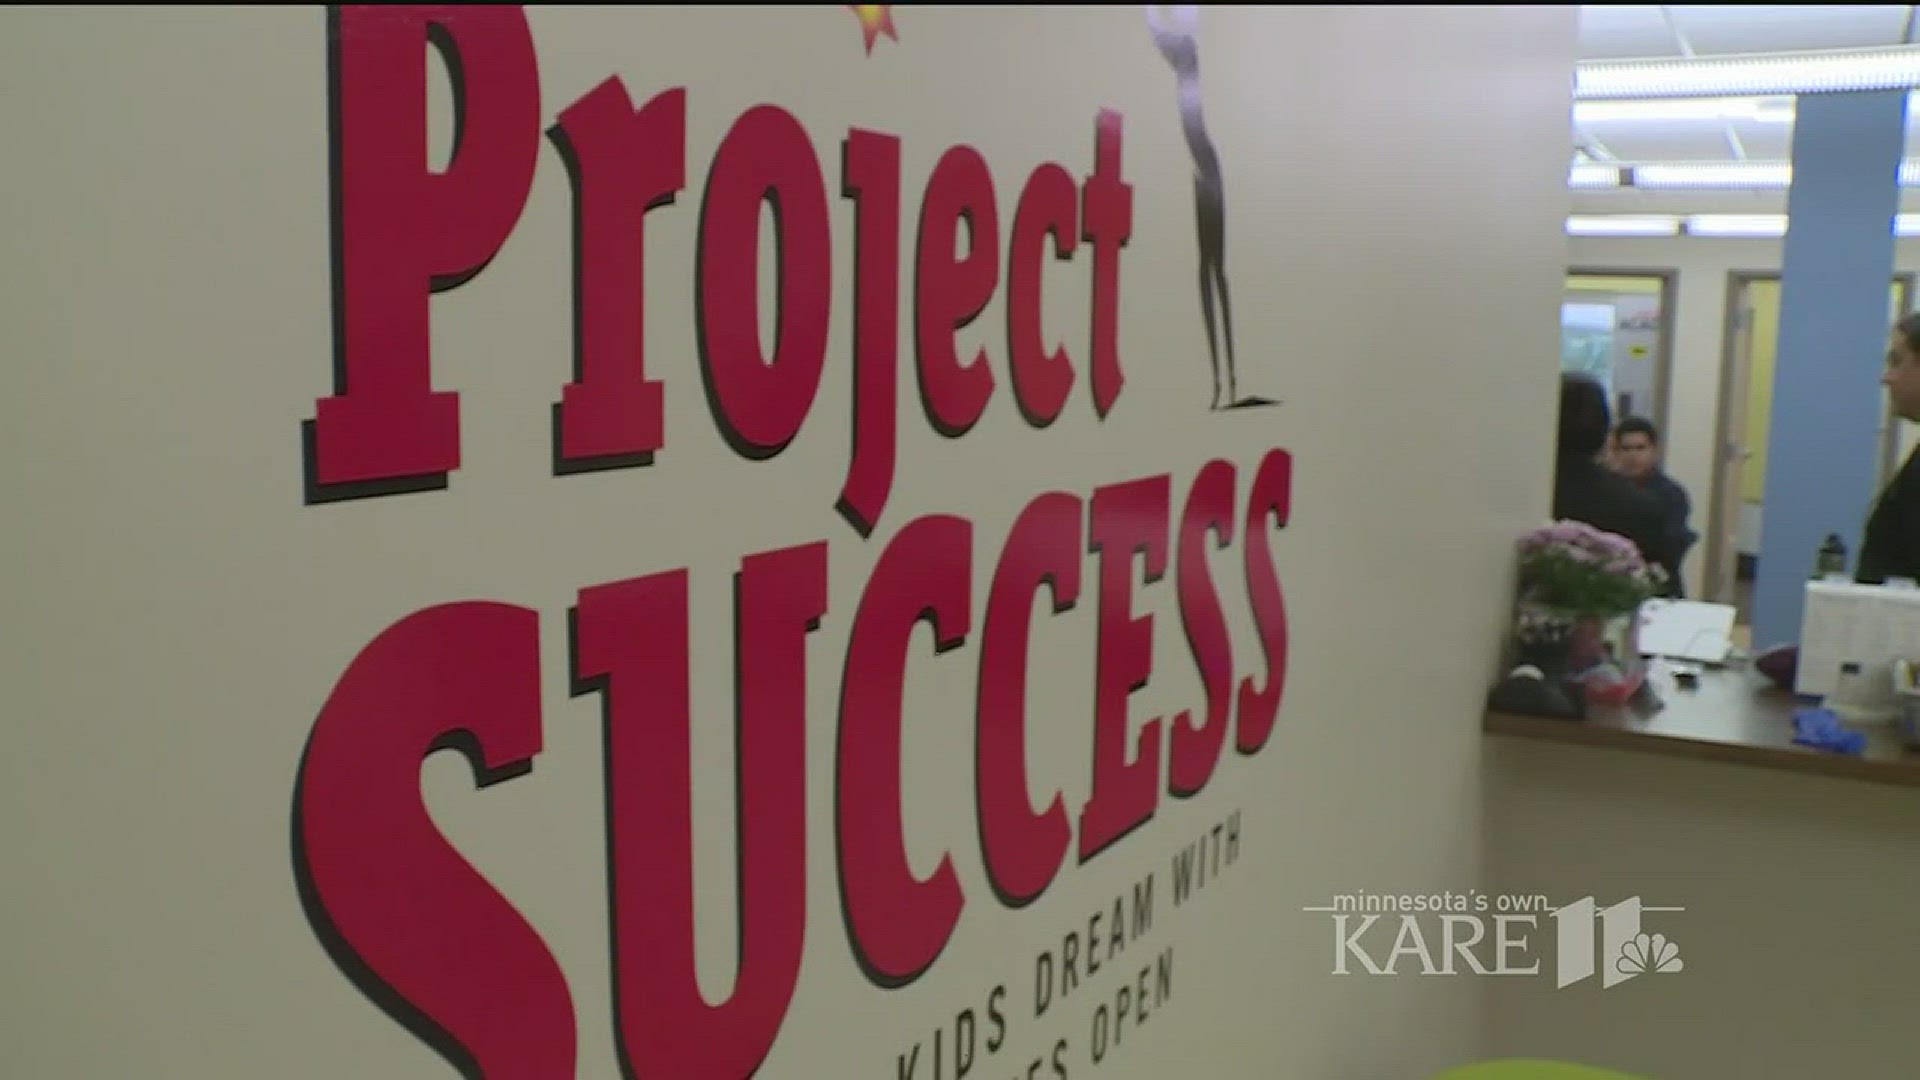 Project Success gets boost to help students via Super Bowl Legacy grant